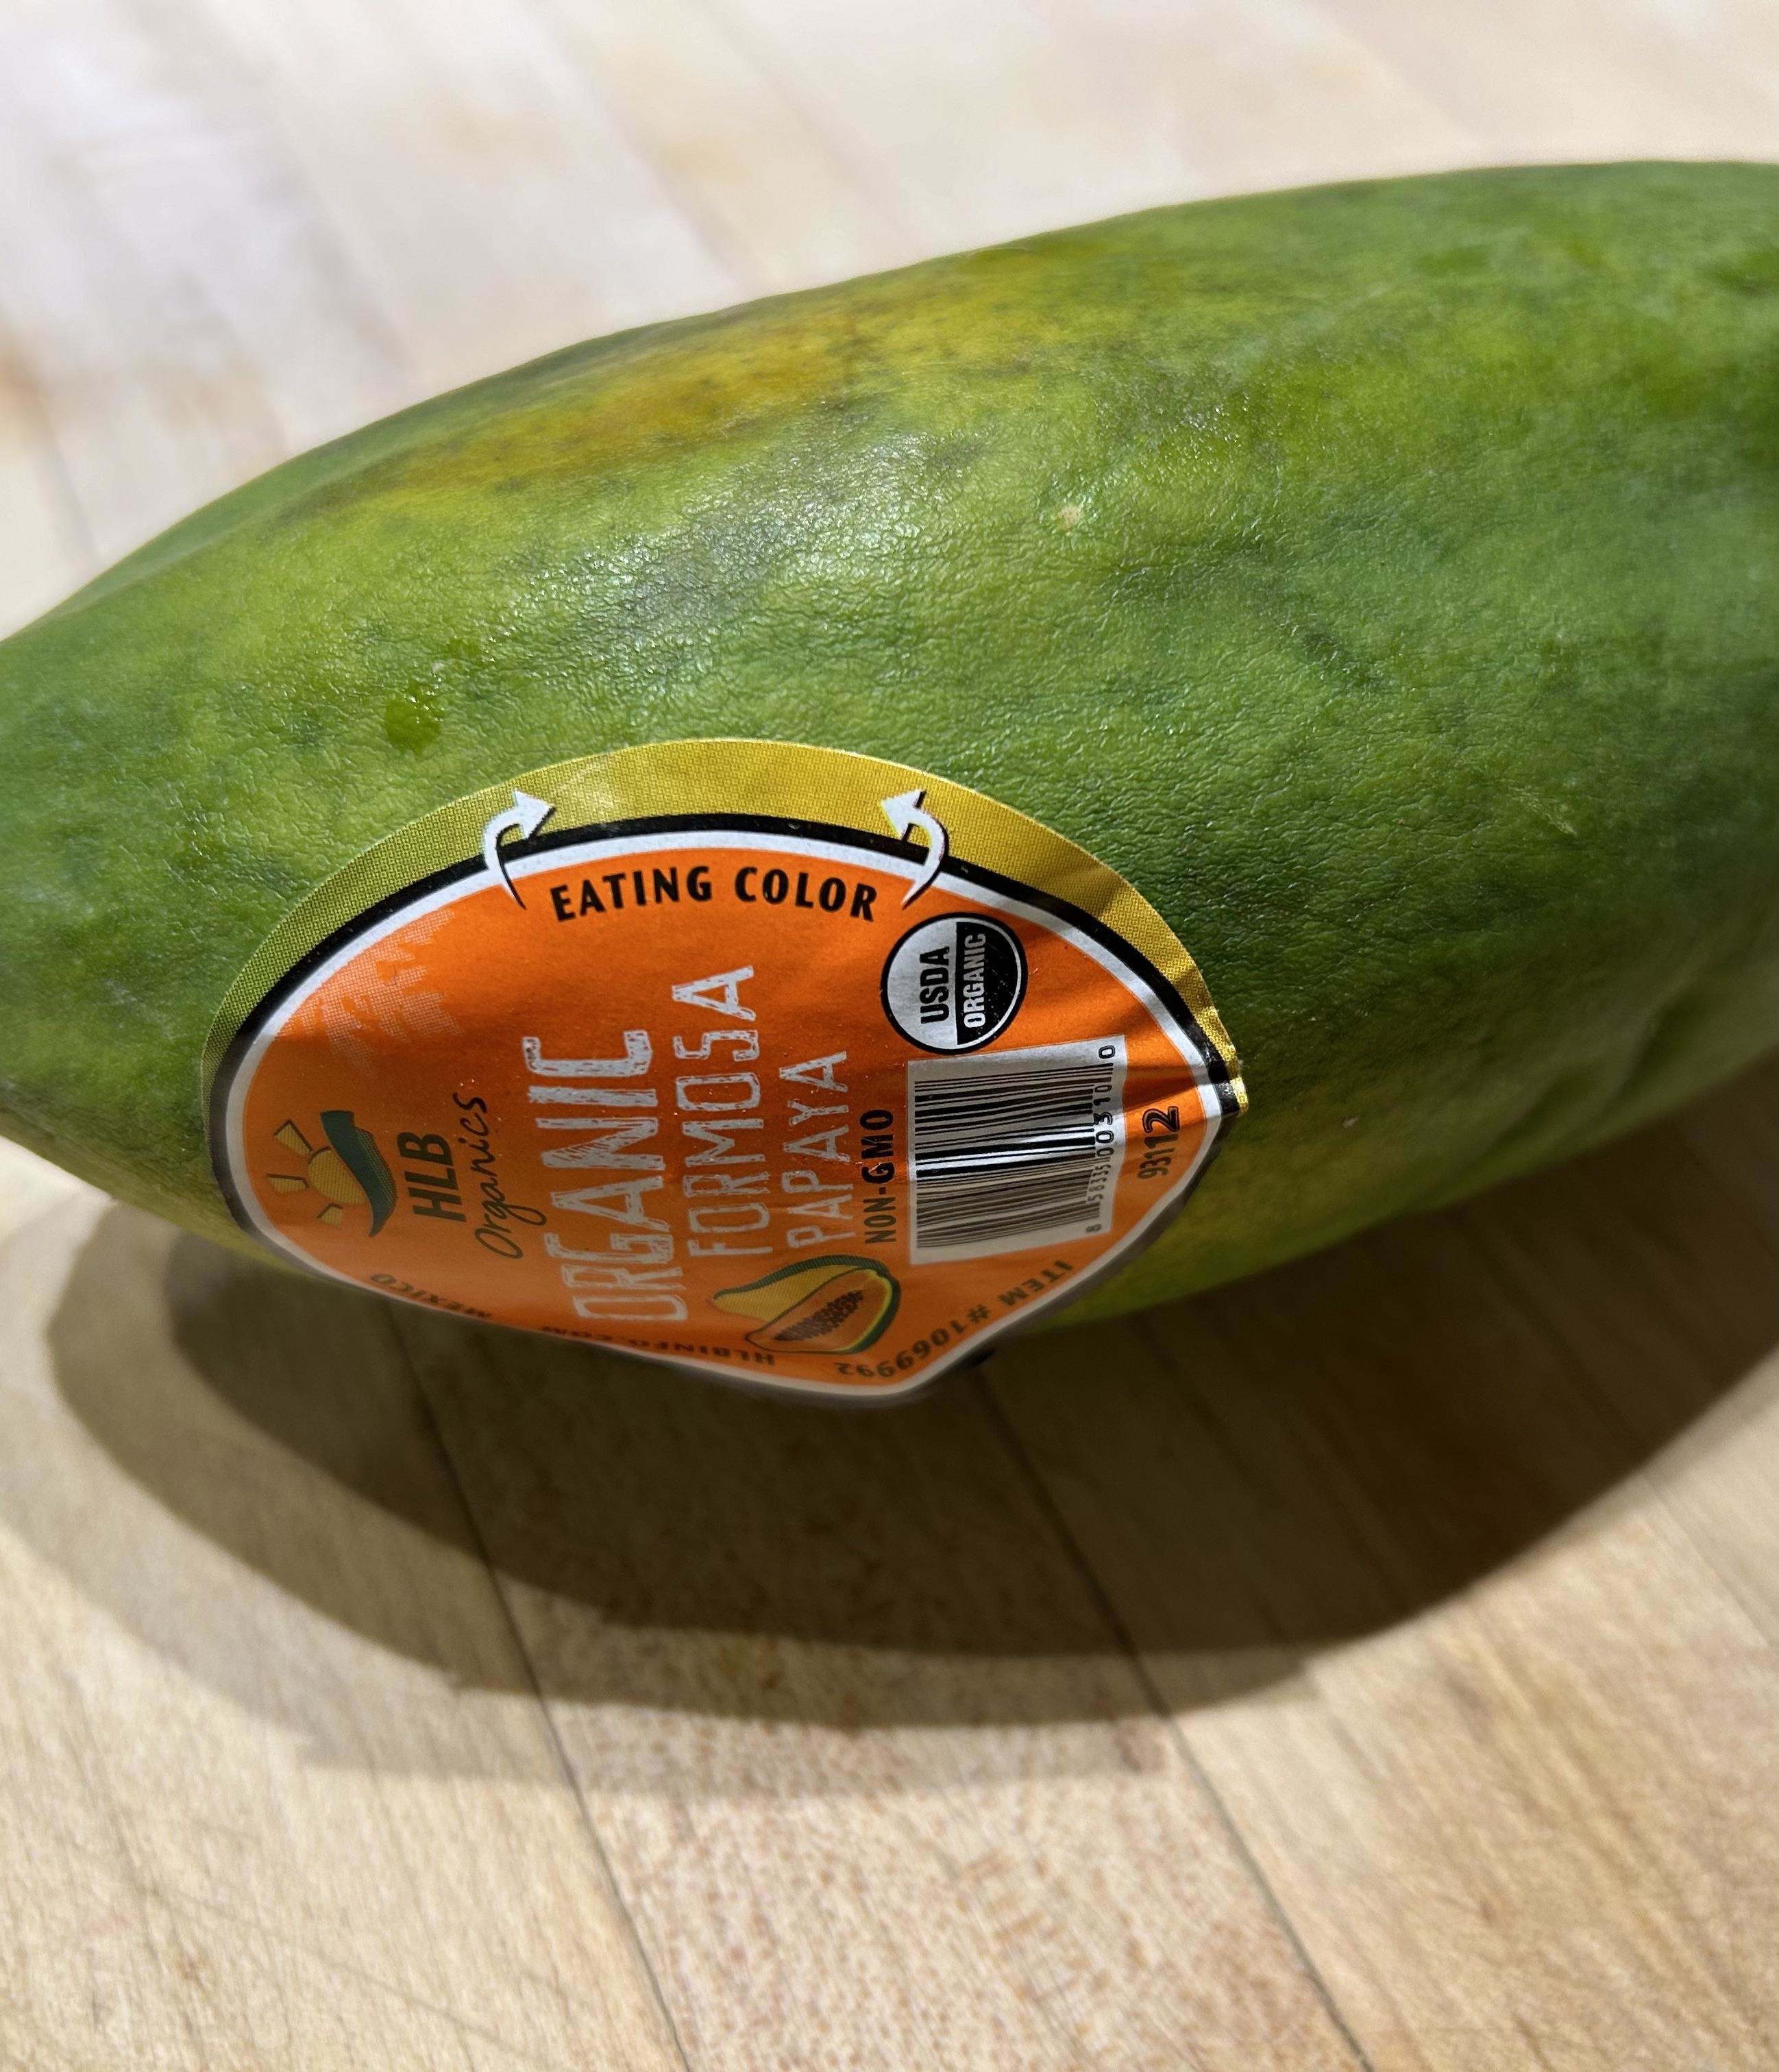 Sticker on a papaya with text &quot;EATING COLOR Organic UGLYFRUIT&quot; to promote produce